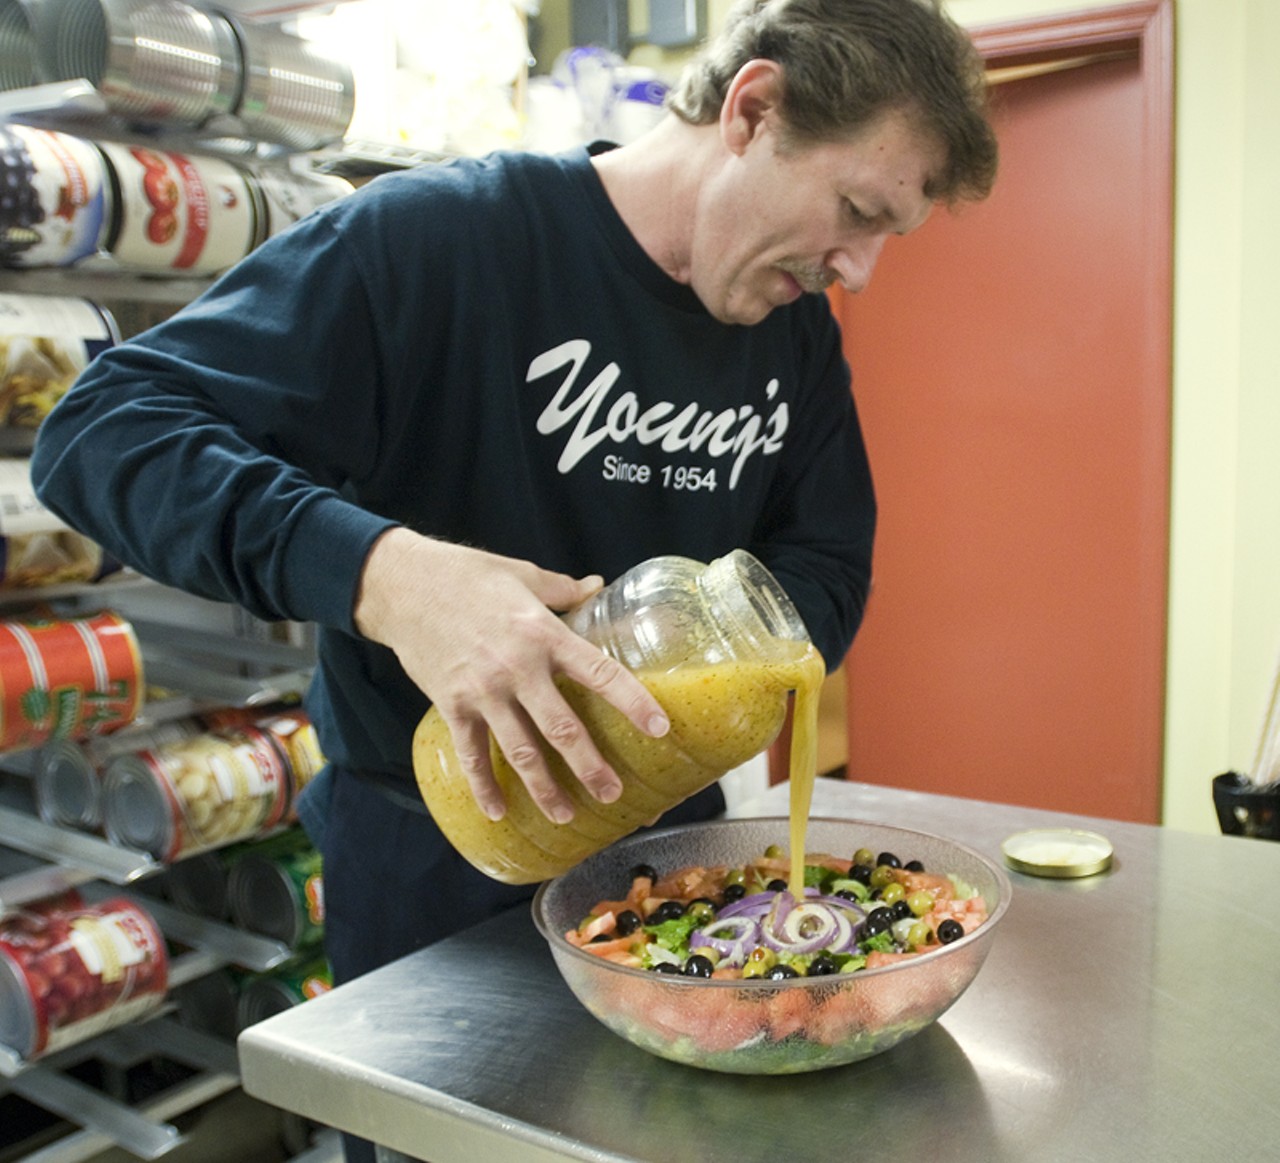 Here, Grant is preparing a large (for the catered event in back) house salad.